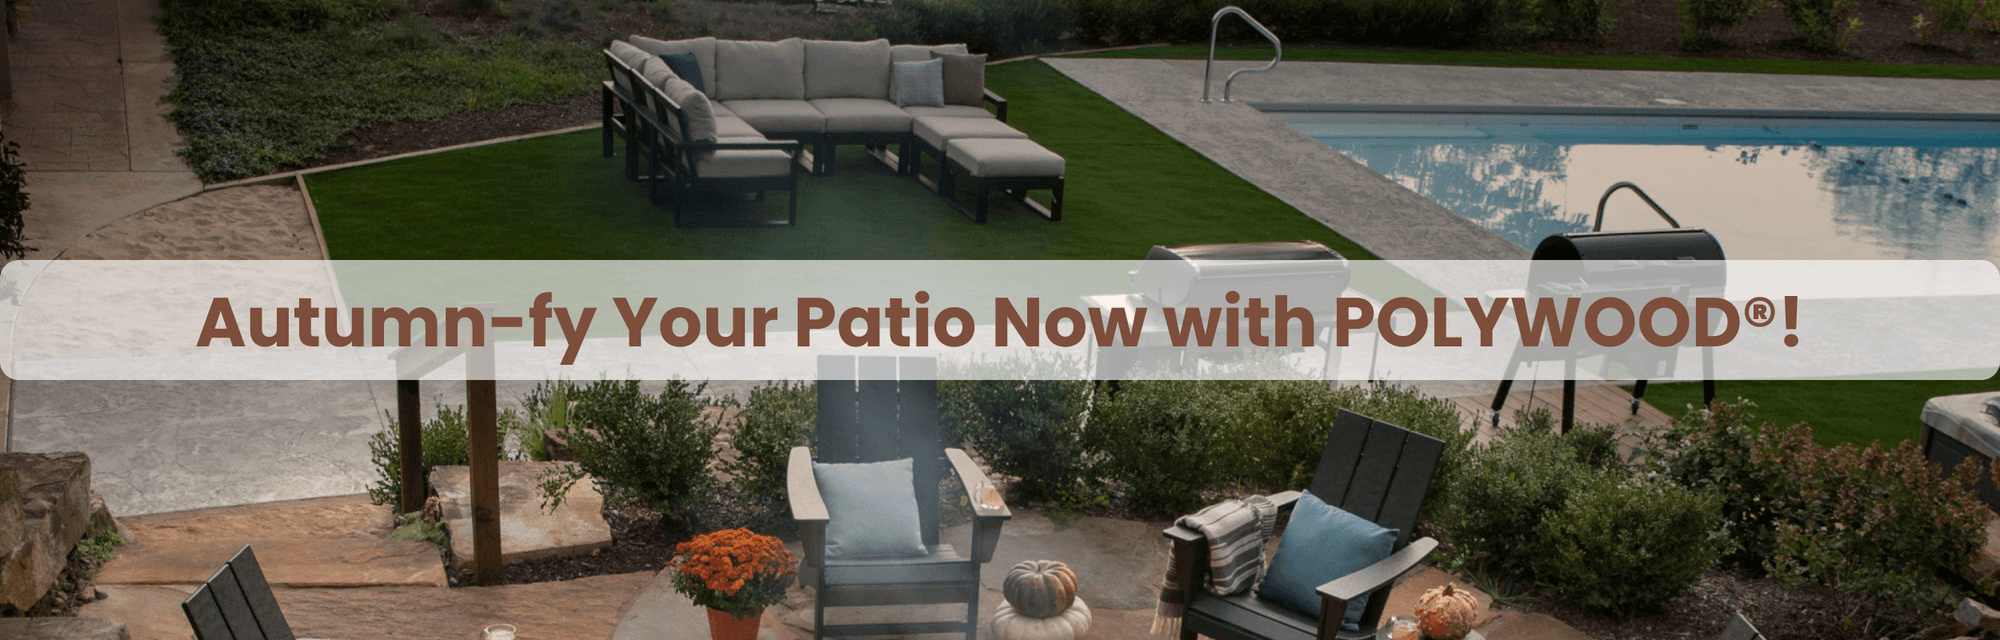 Autumn-fy Your Patio Now with POLYWOOD®!